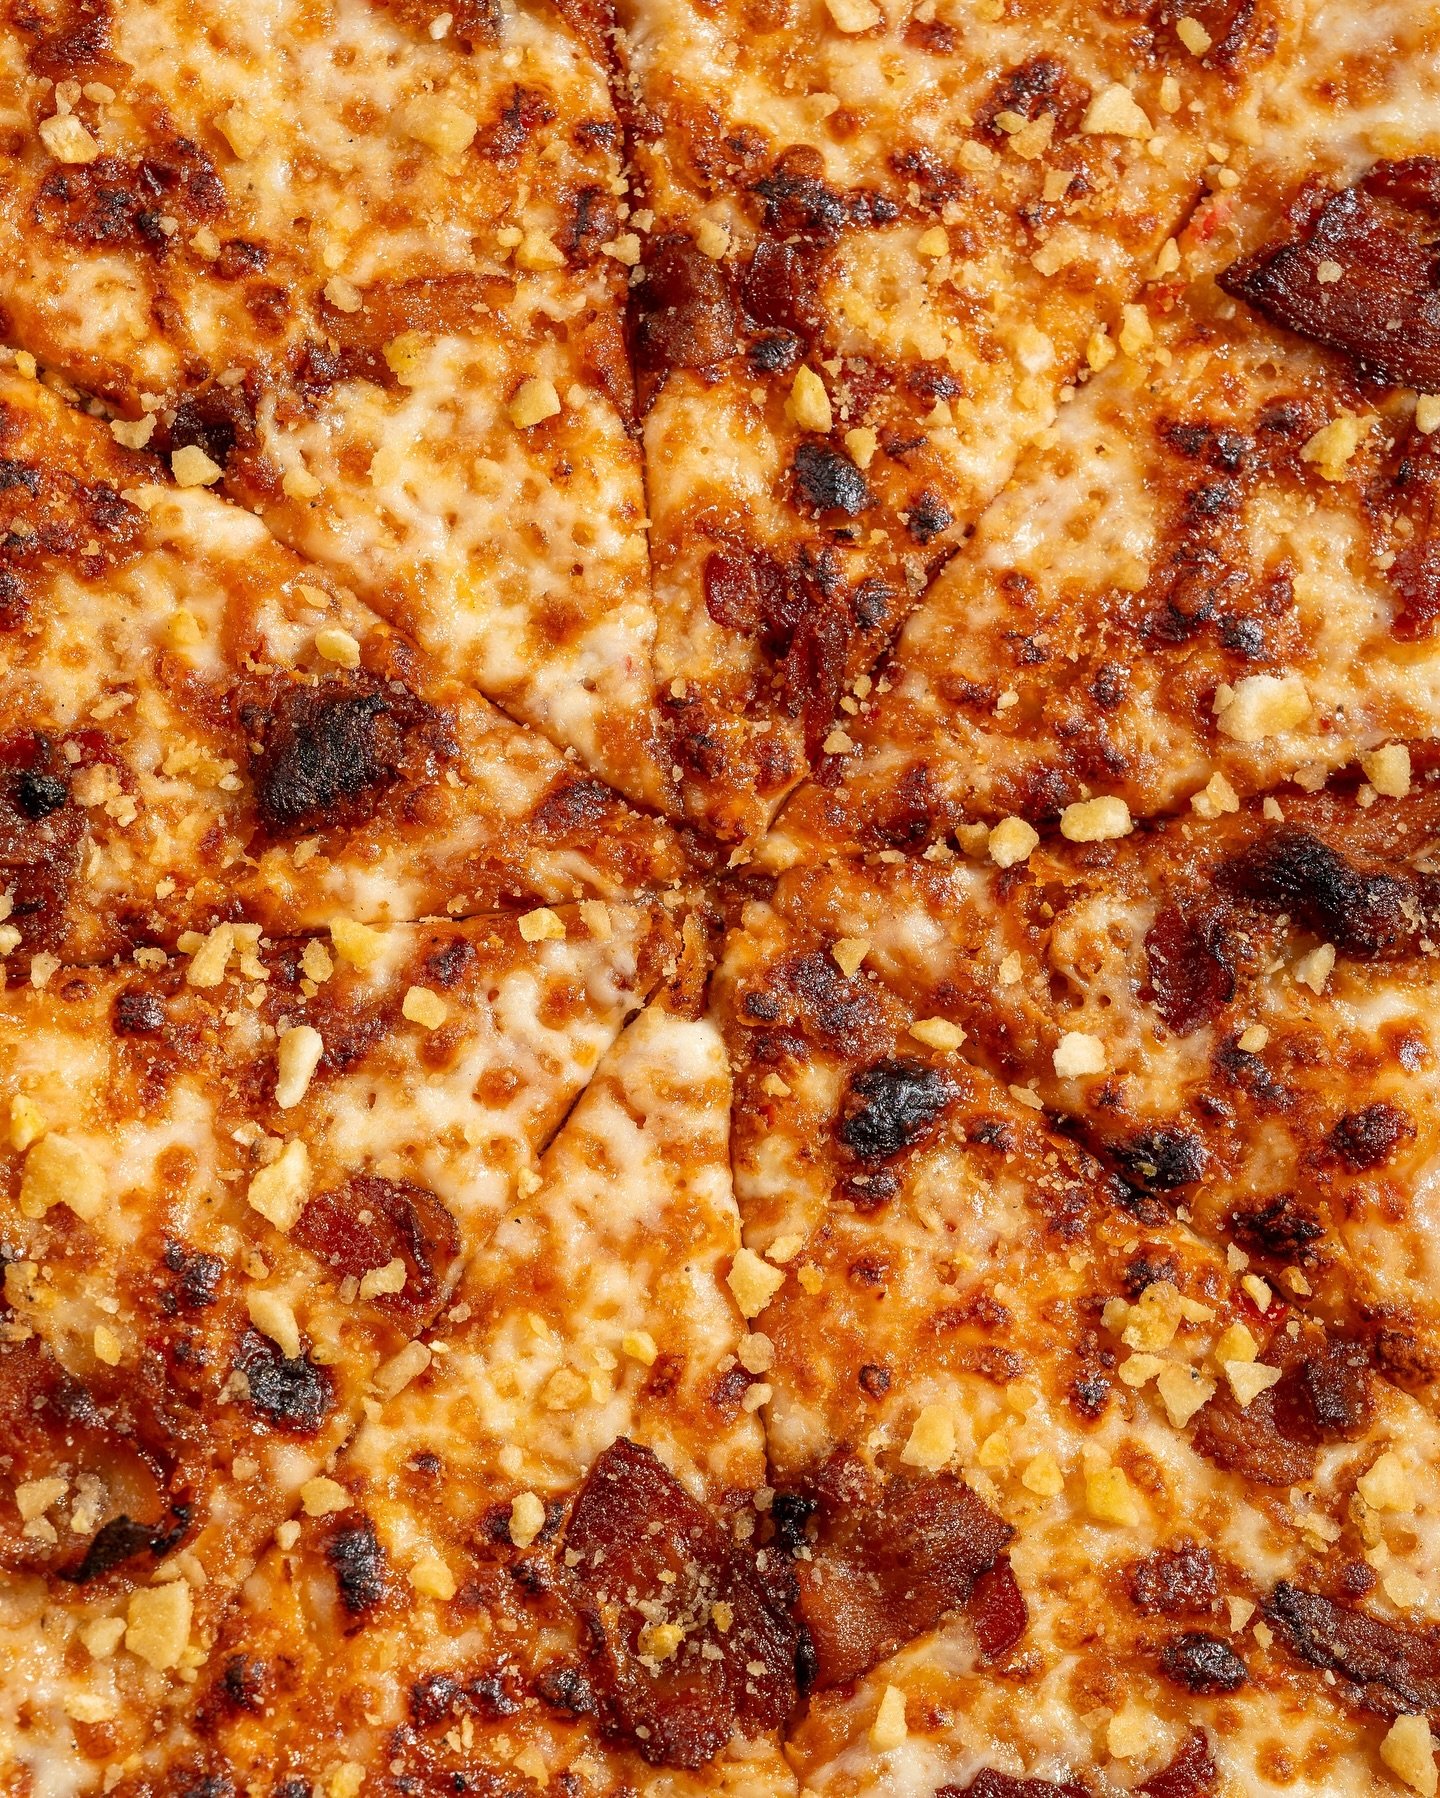 There&rsquo;s only two weeks left to try May&rsquo;s PIE OF THE MONTH: The Graceland 🍌🥓🥜

A Sweet and Spicy Peanut Butter base, Bacon and Crushed Banana Chips

Stop in this week to give this delicious pizza a try!

Stop by any of our three Tallaha